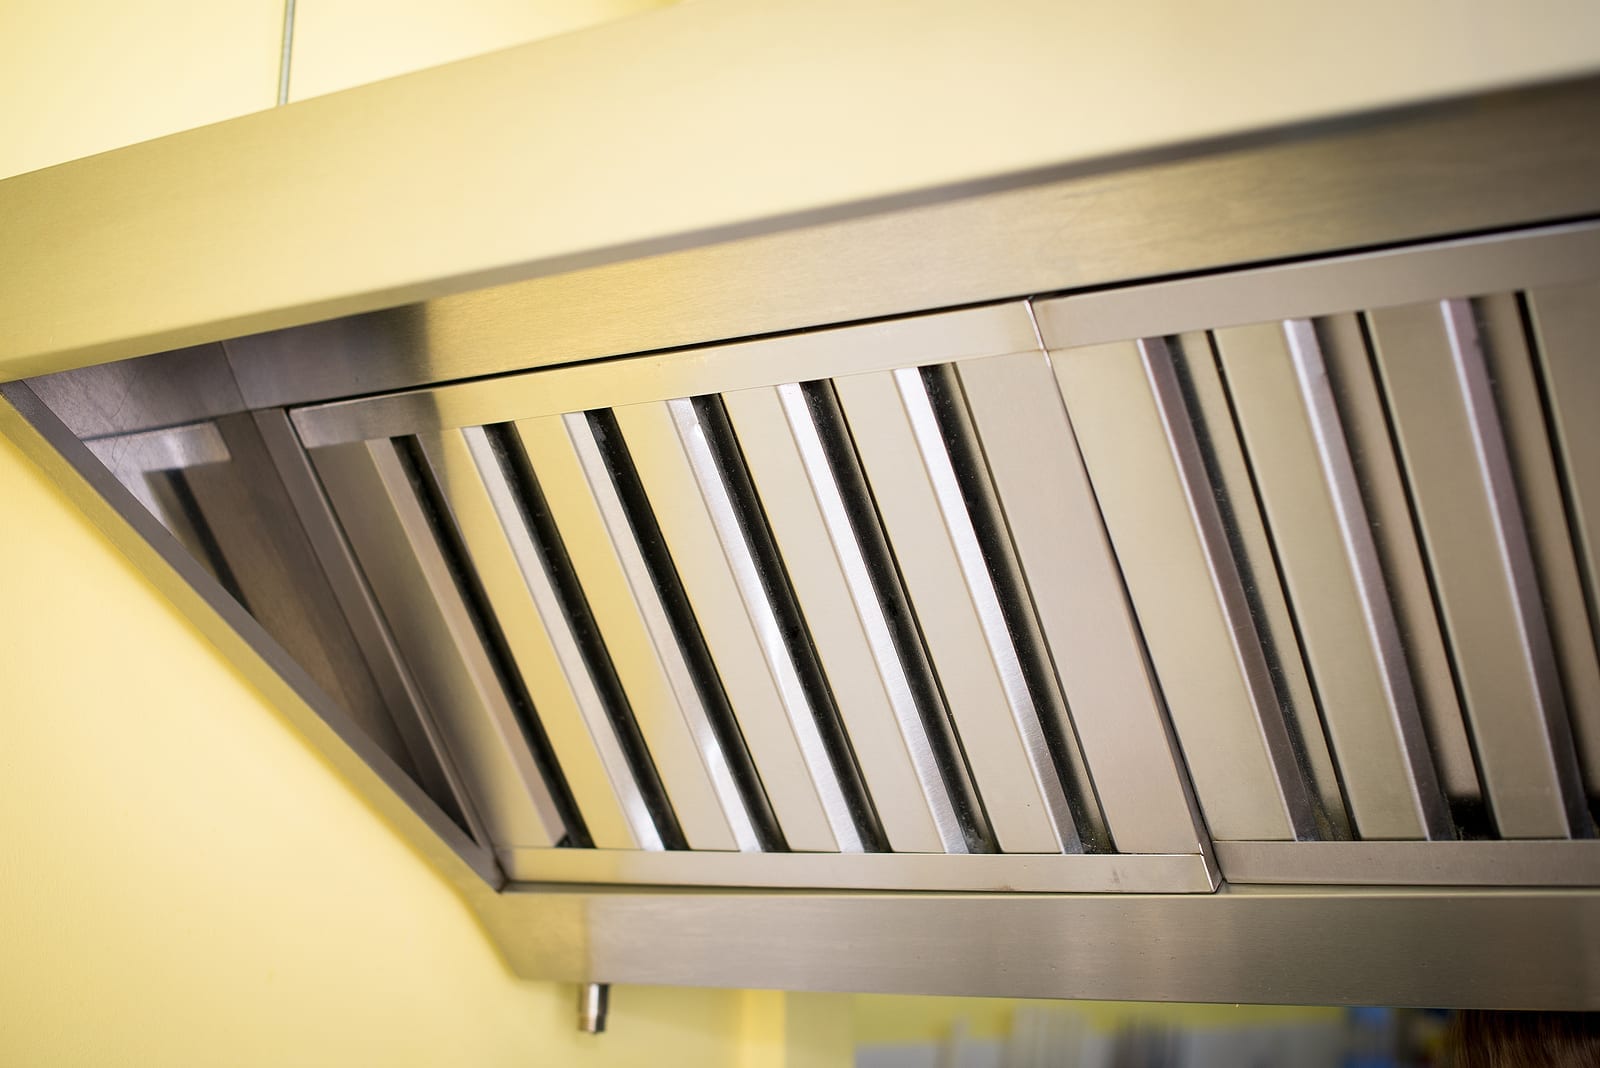 Cleaning kitchen exhausts is required for every commerical cooking establishment